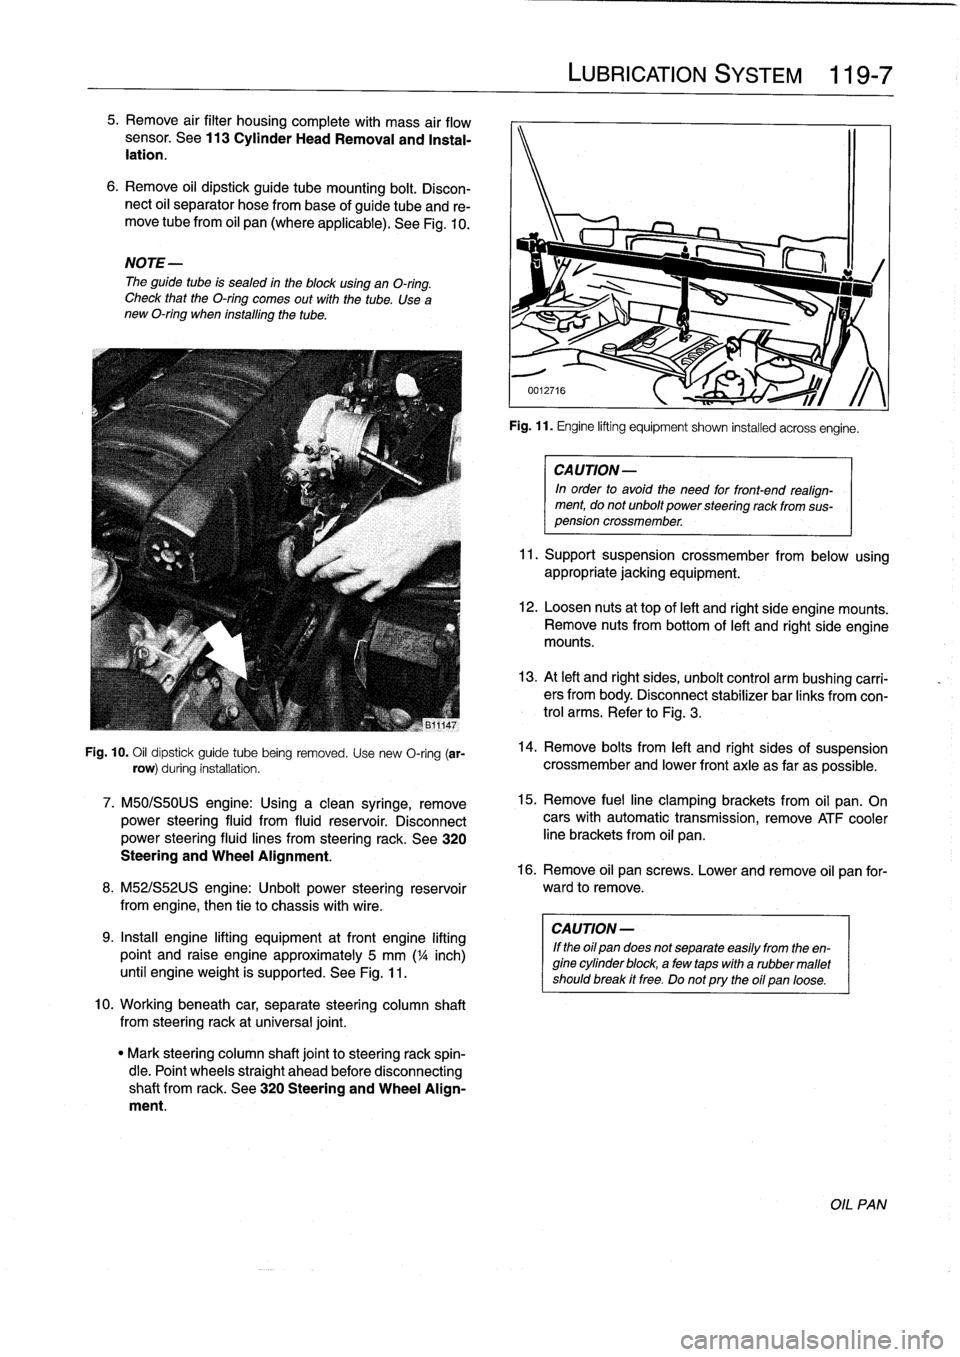 BMW M3 1993 E36 Workshop Manual 
5
.
Remove
air
filter
housingcomplete
with
mass
air
flow
sensor
.
See113
Cylinder
HeadRemoval
and
Instal-
lation
.

6
.
Remove
oil
dipstick
guide
tube
mounting
bolt
.
Discon-
nect
oil
separator
hose
